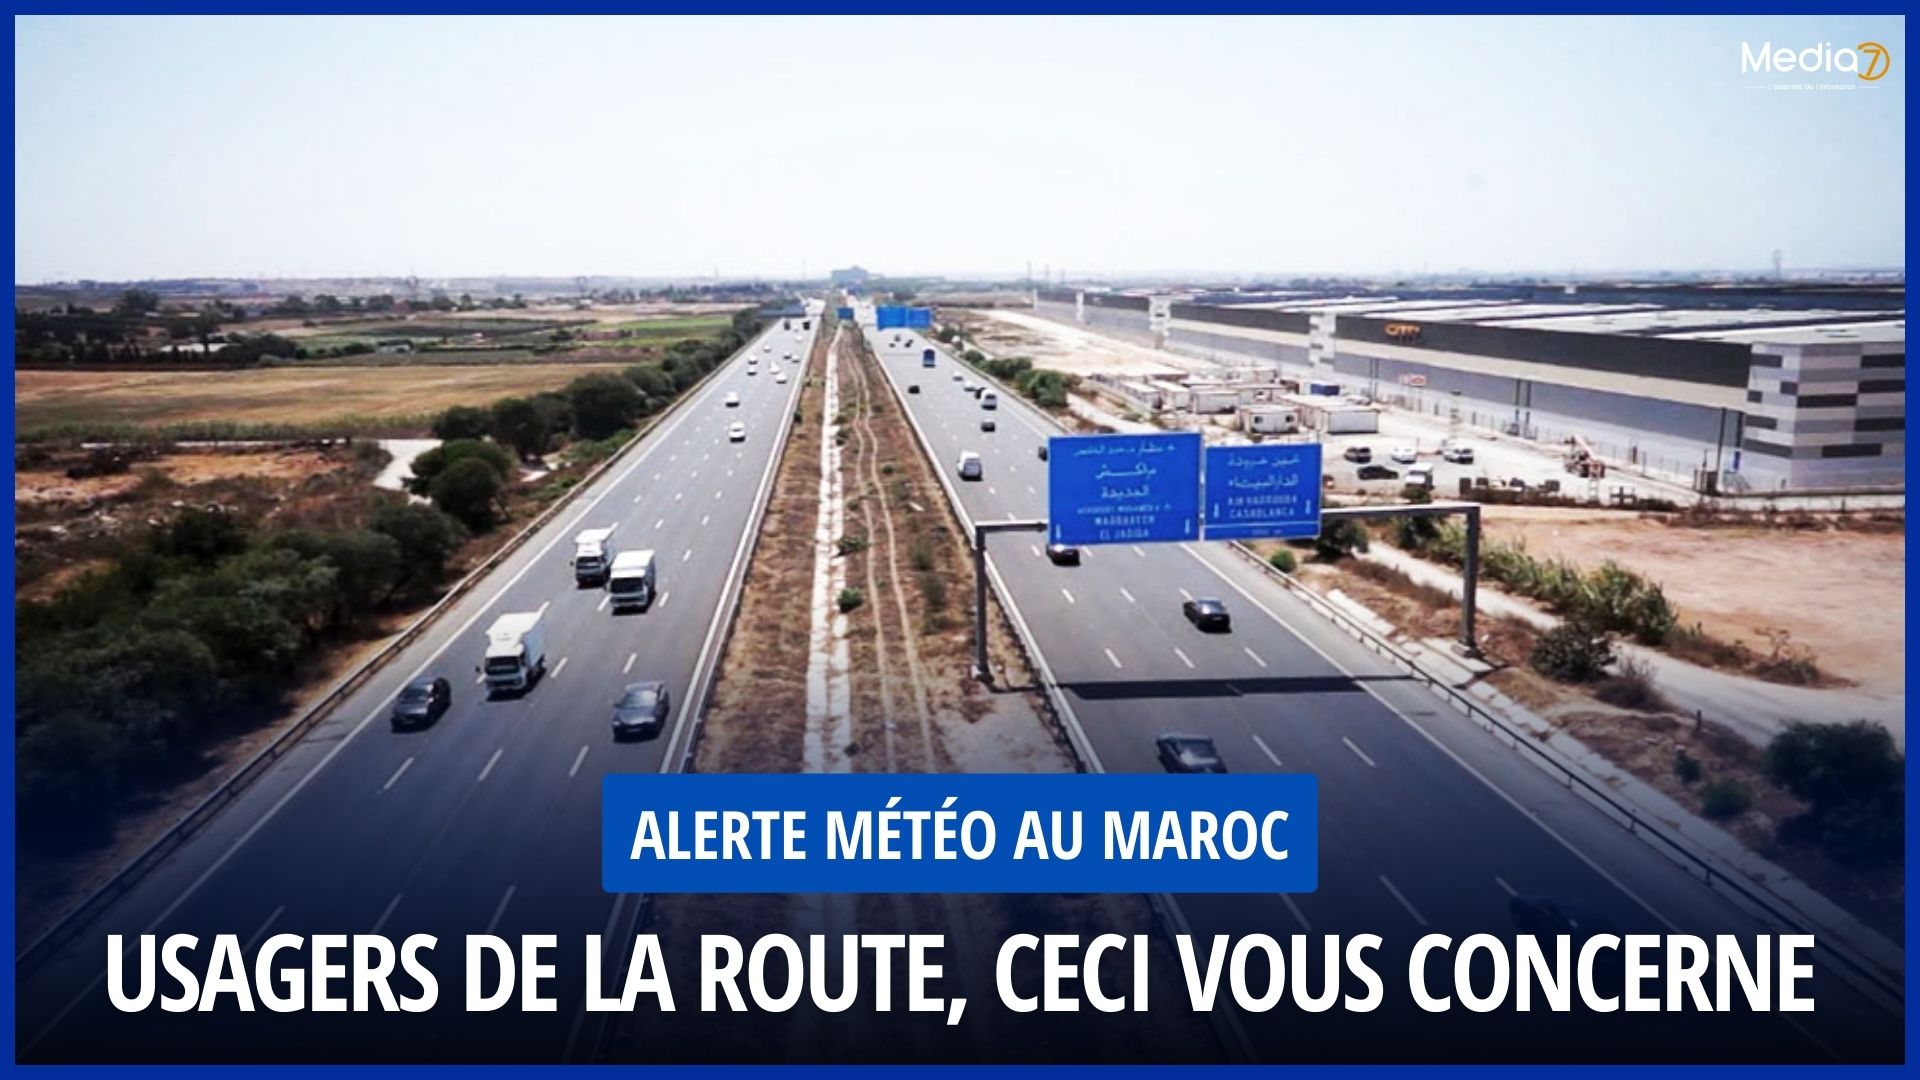 Weather Alert in Morocco: Road users, this concerns you (ADM)